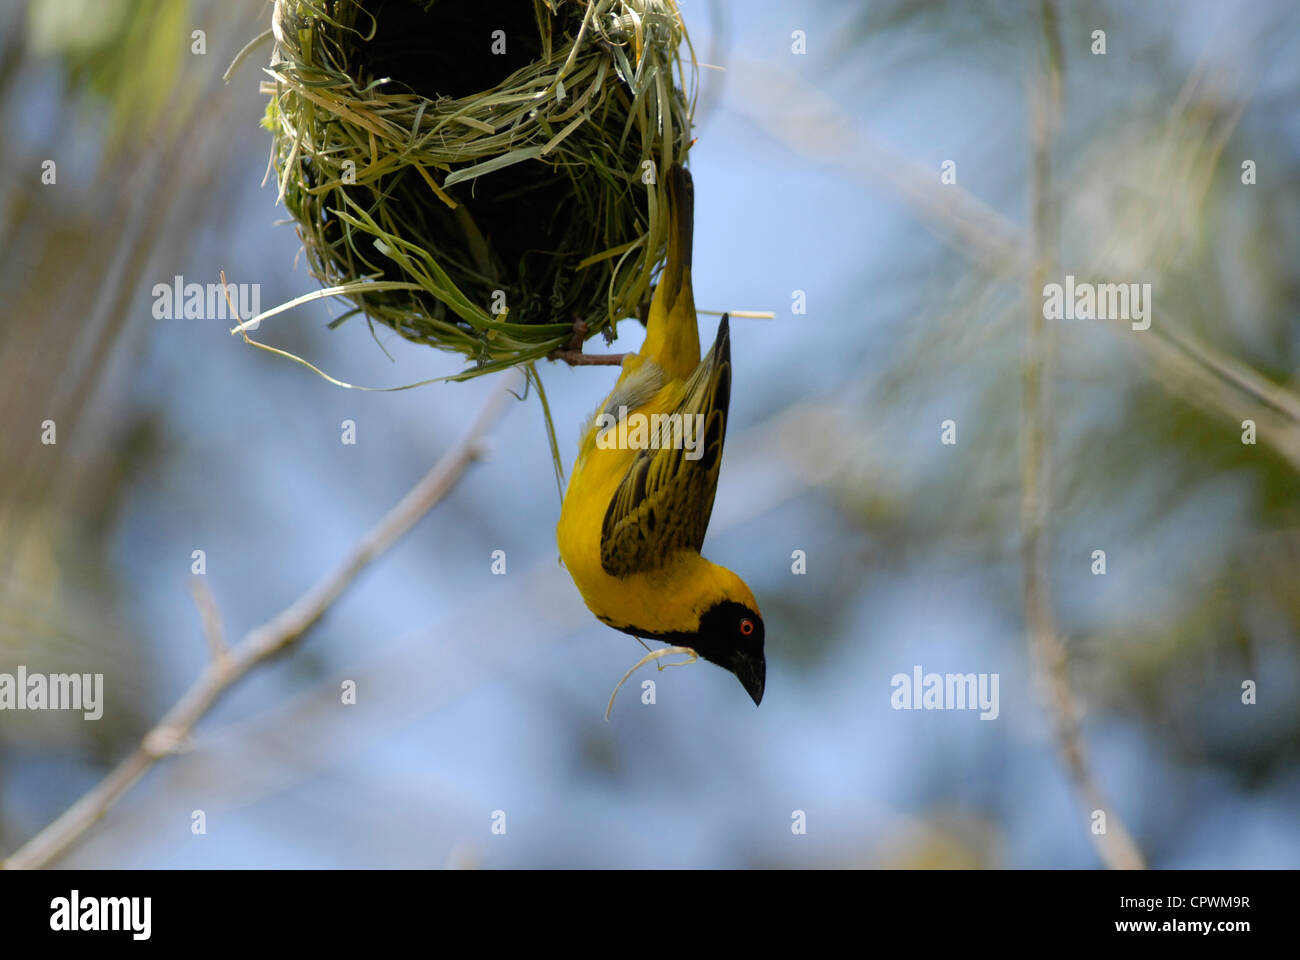 A Southern Masked Weaver bird building a nest in the tree. Johannesburg, South Africa. Stock Photo